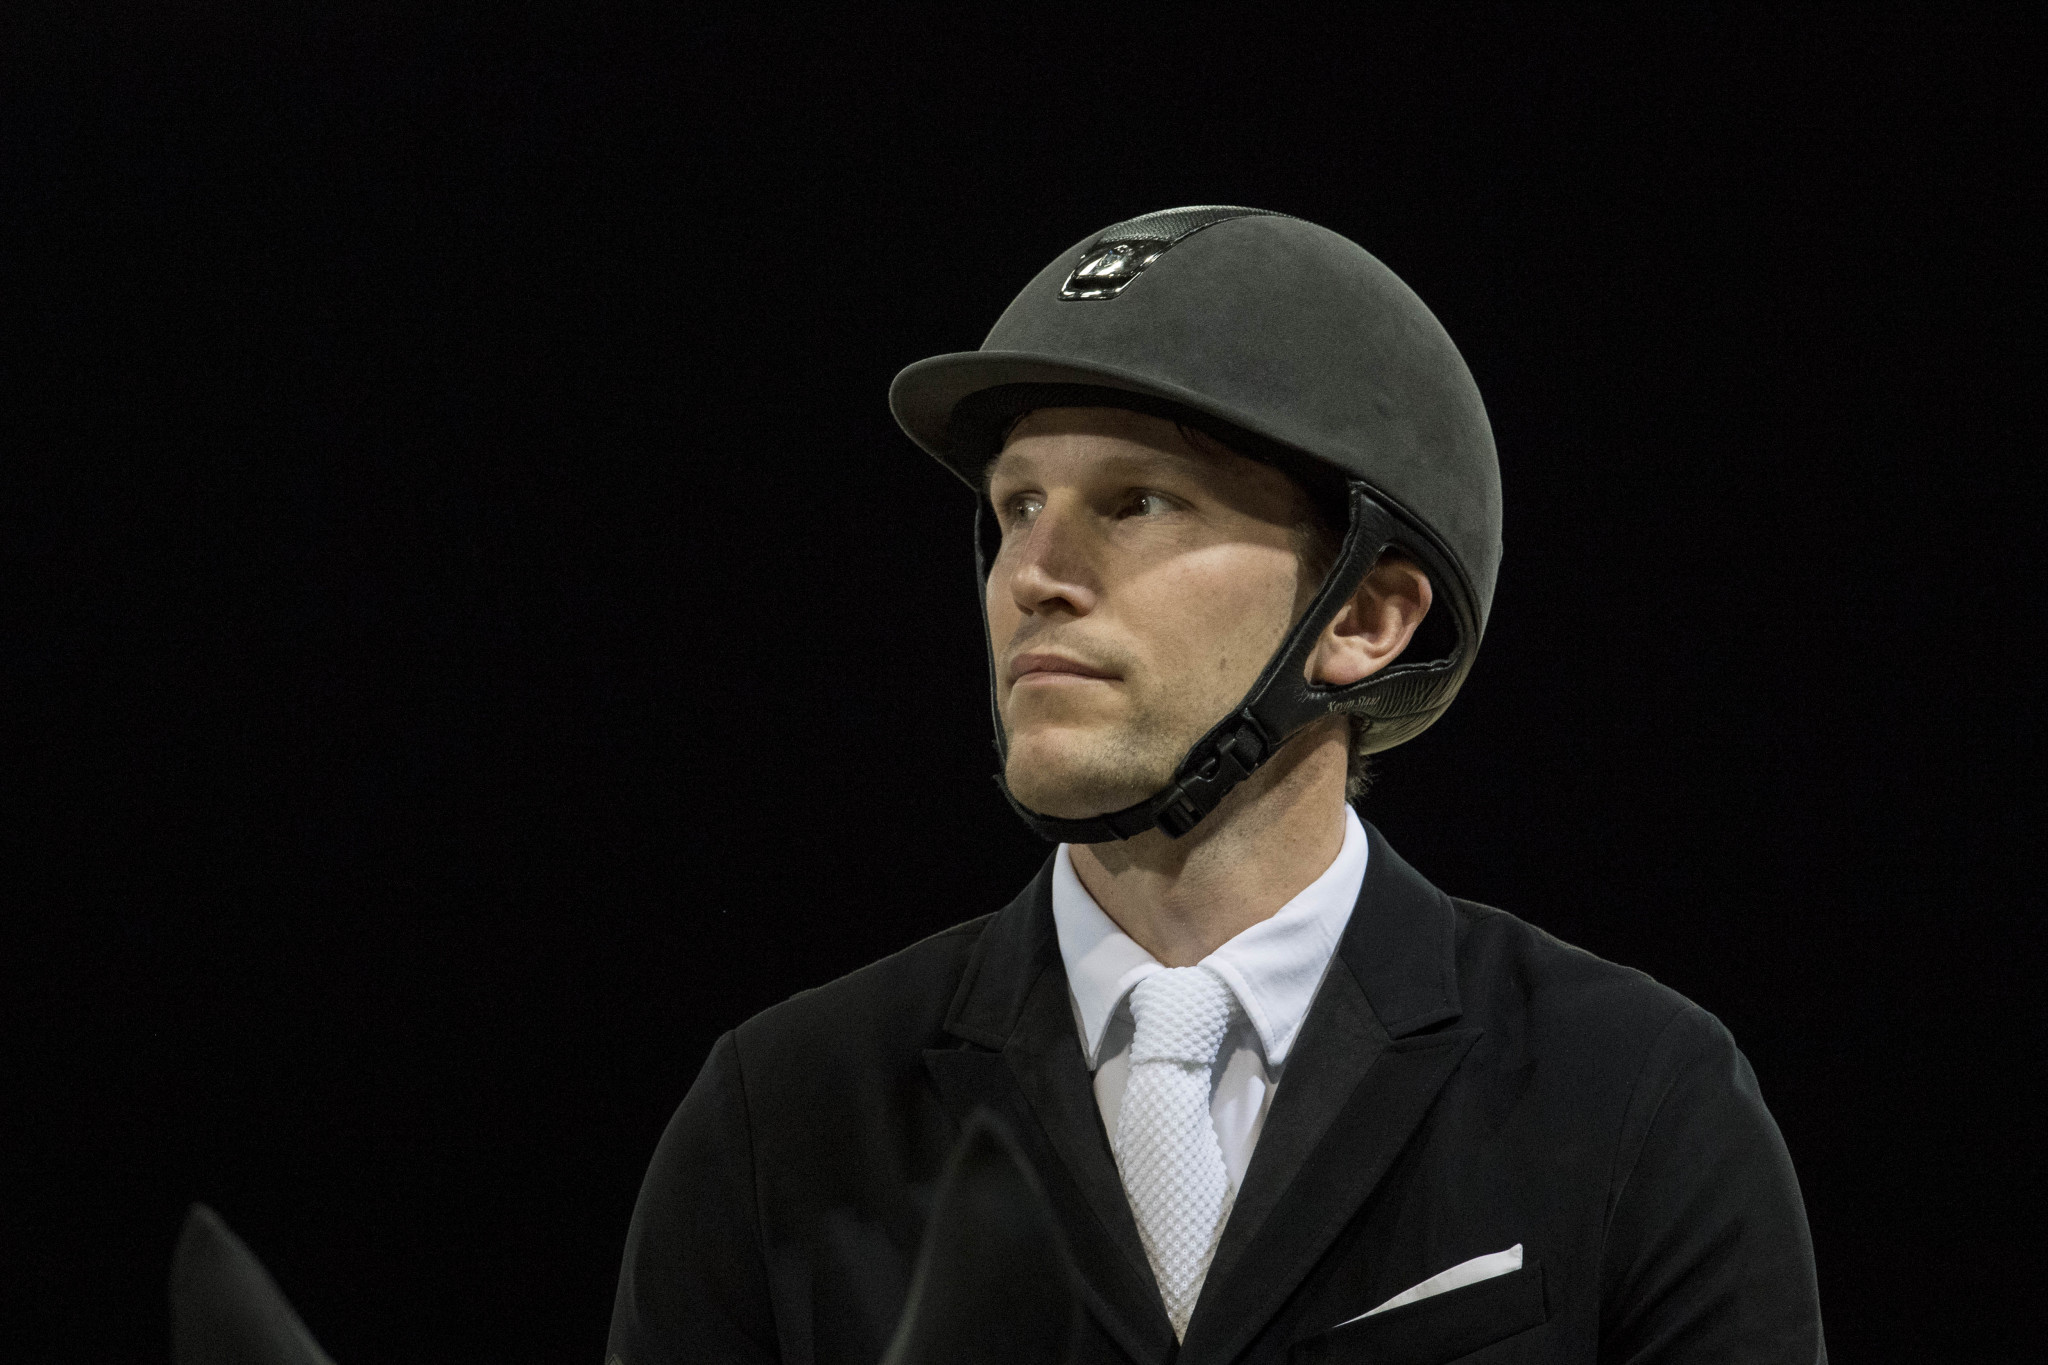 Kevin Staut of France came second in the ninth leg of the FEI Jumping World Cup in Mechelen, moving up to third in the overall standings with four more qualifying events remaining ©Getty Images